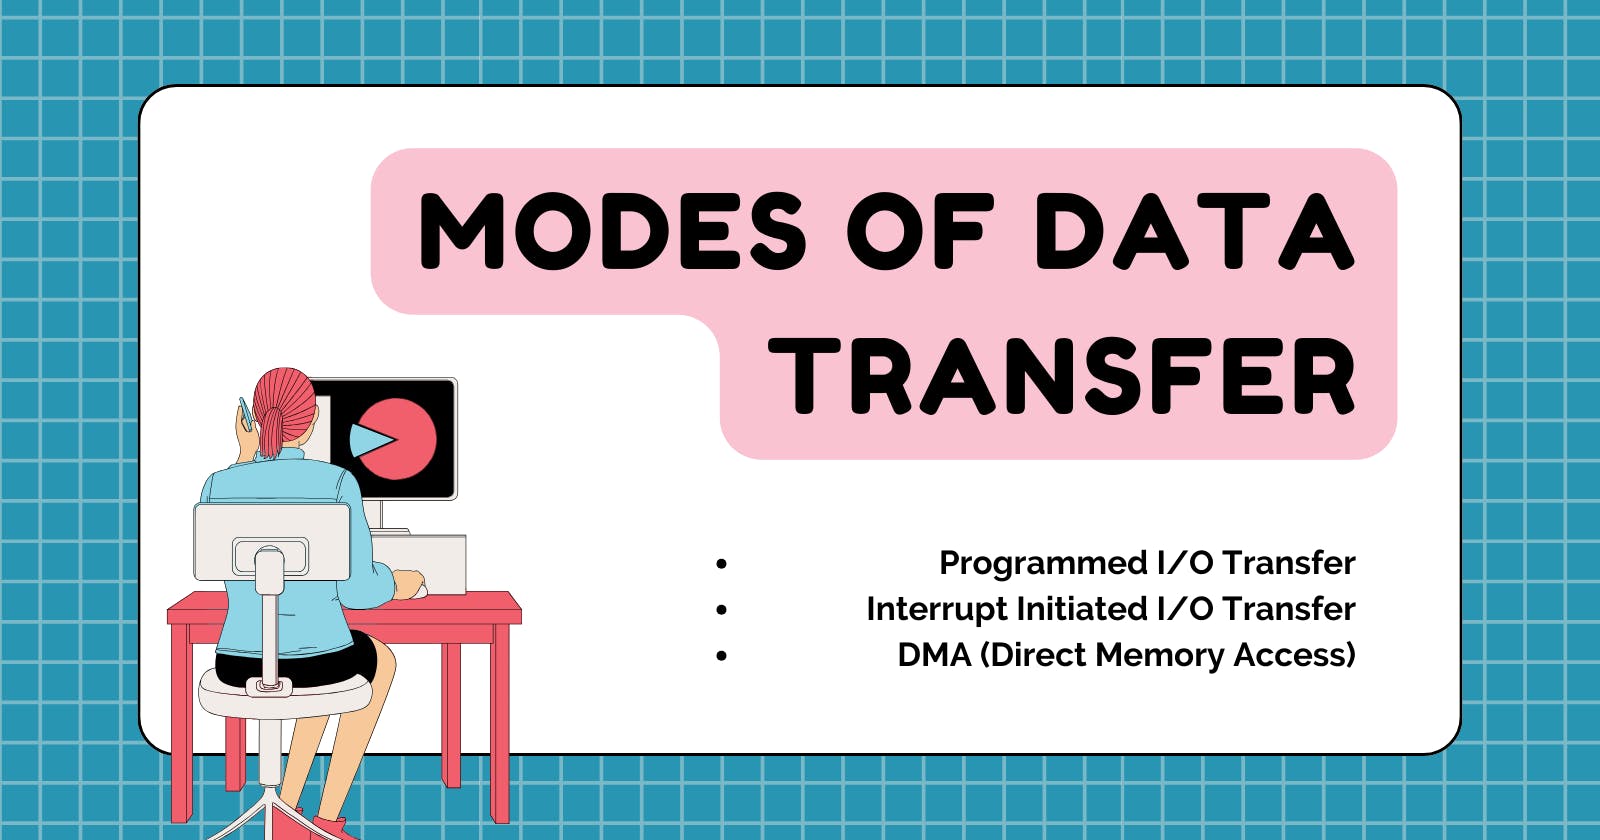 Modes of Transfer :-